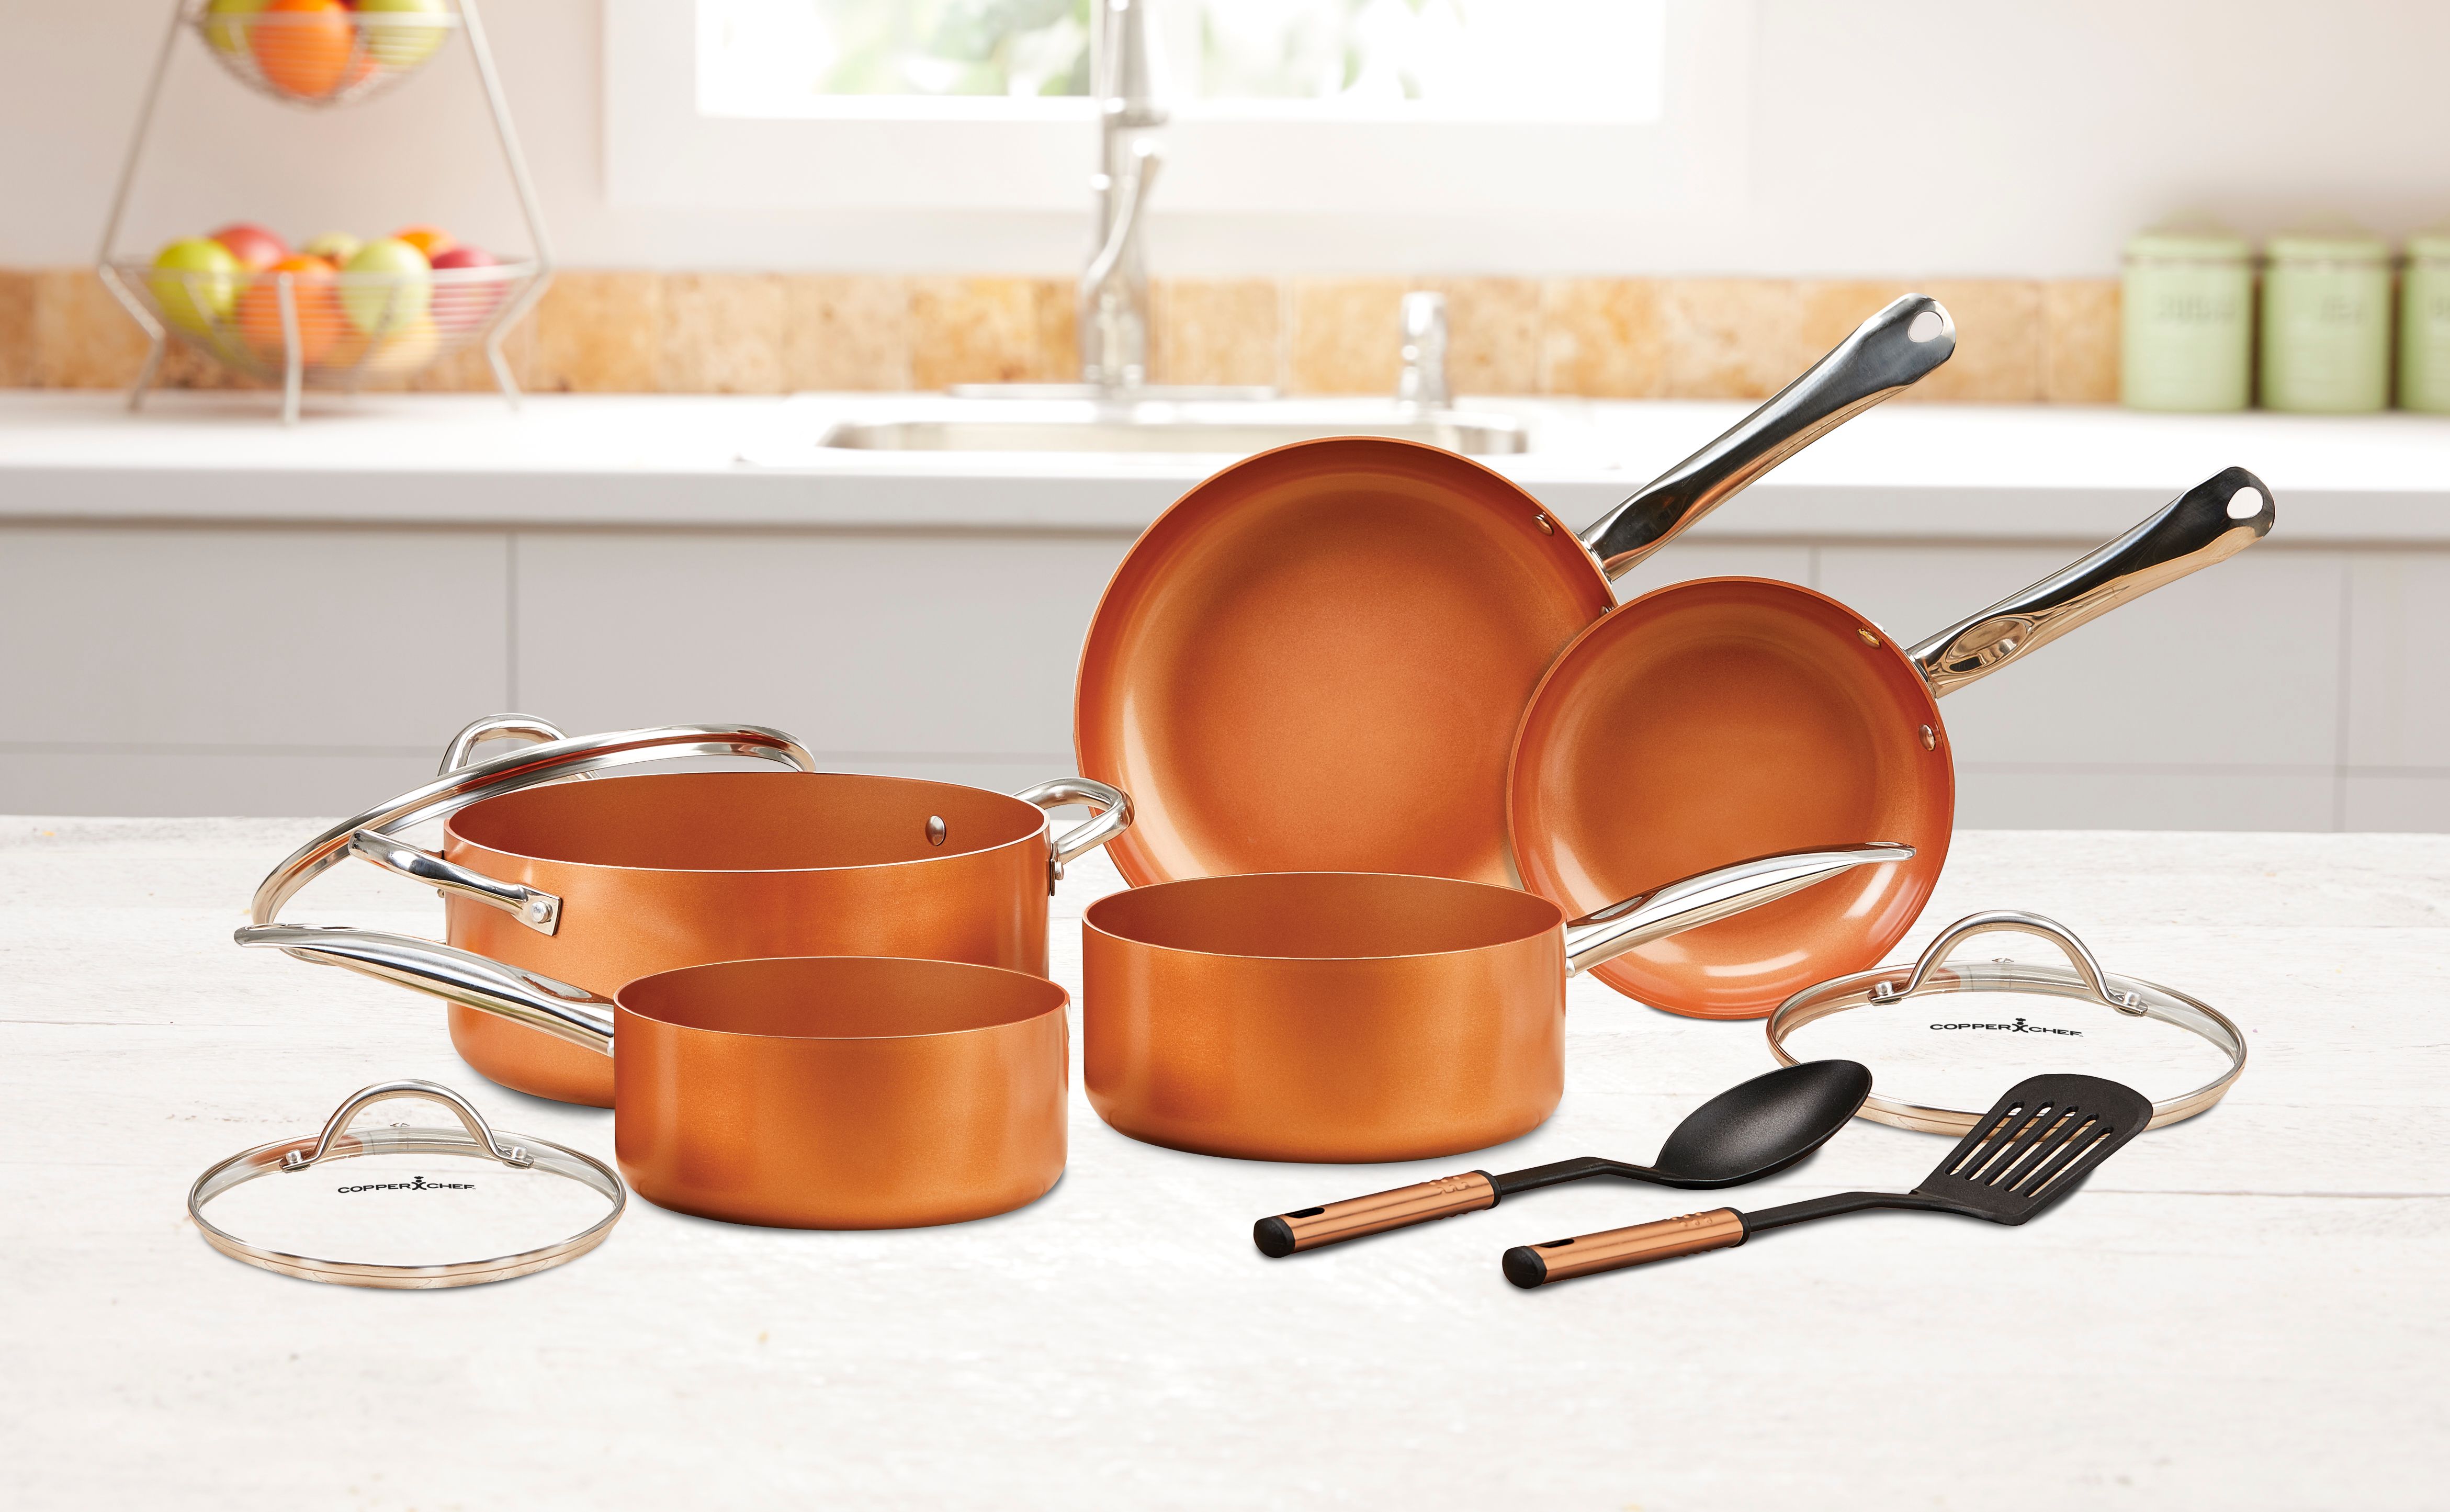 Copper Chef 10 Piece Nonstick Pan Set, with CeramiTech - image 5 of 5